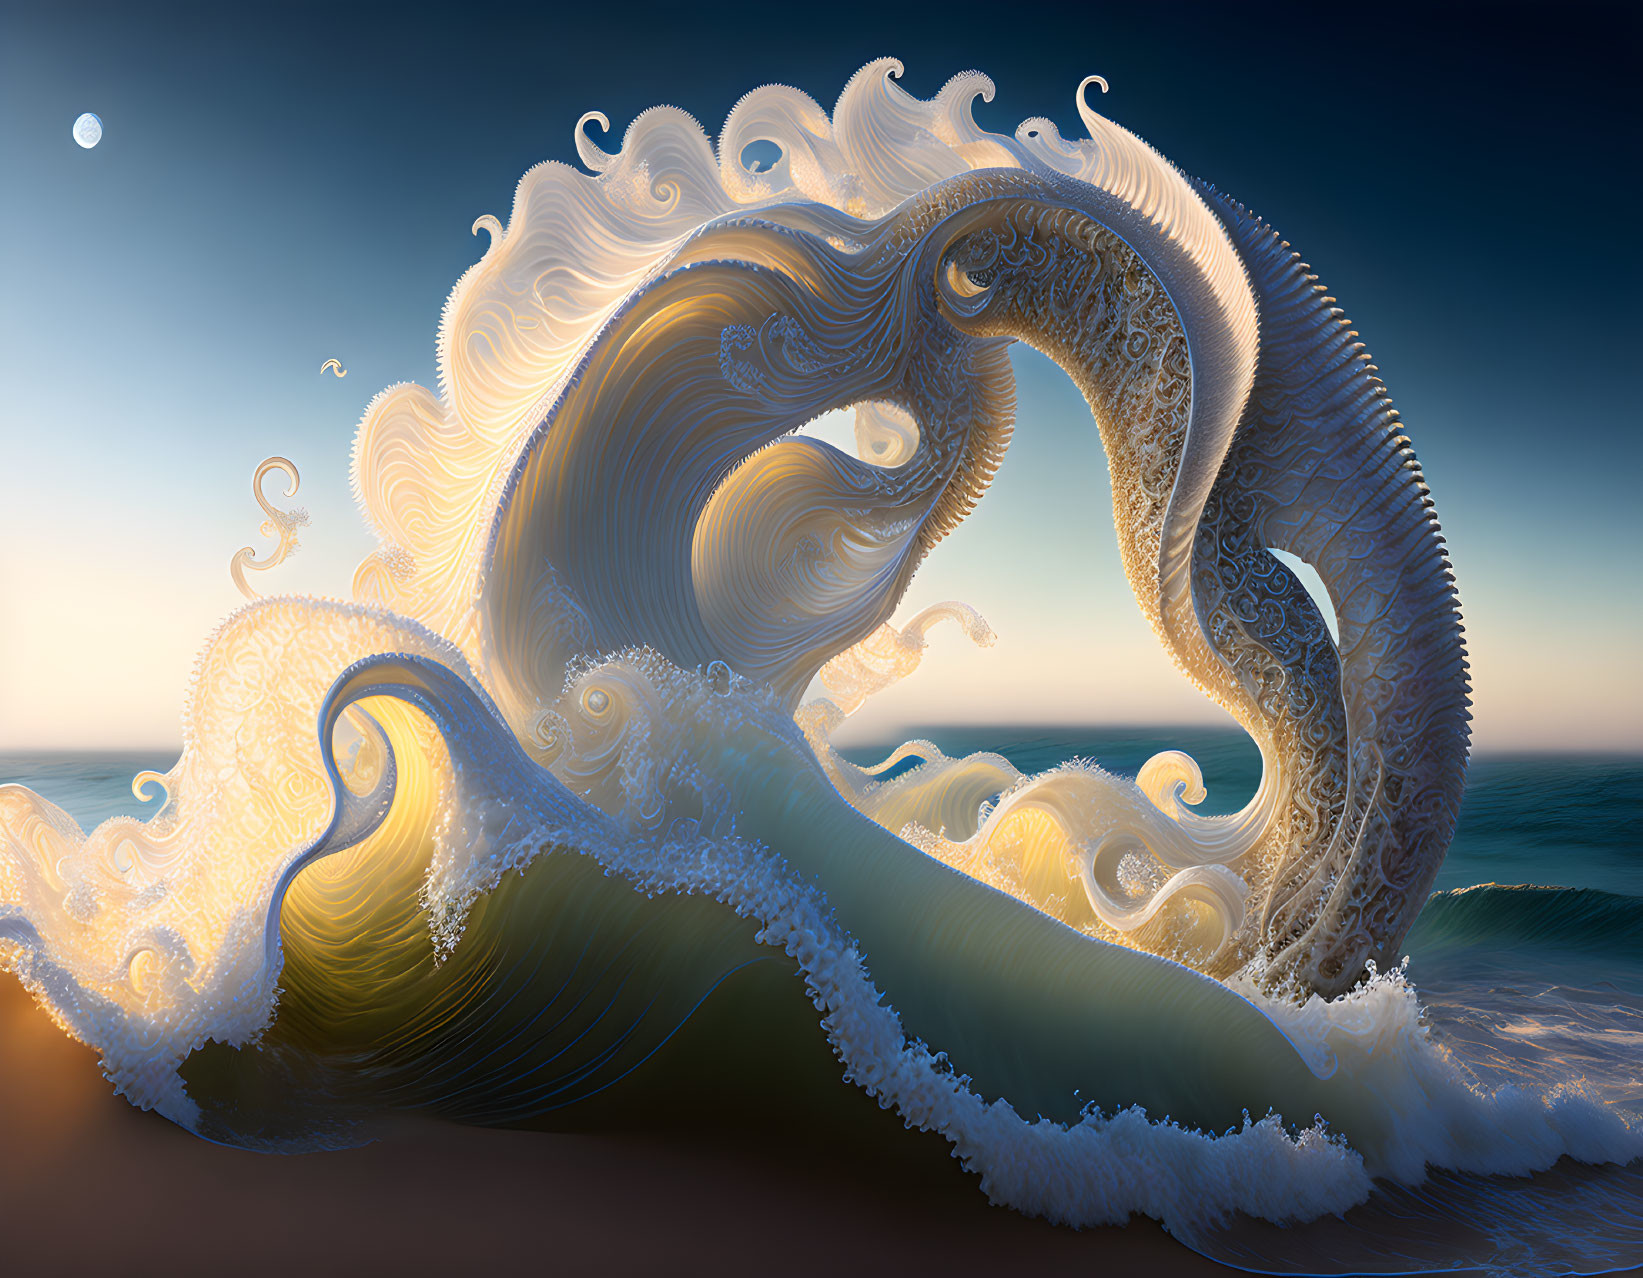 Surreal wave illustration with intricate patterns under twilight sky